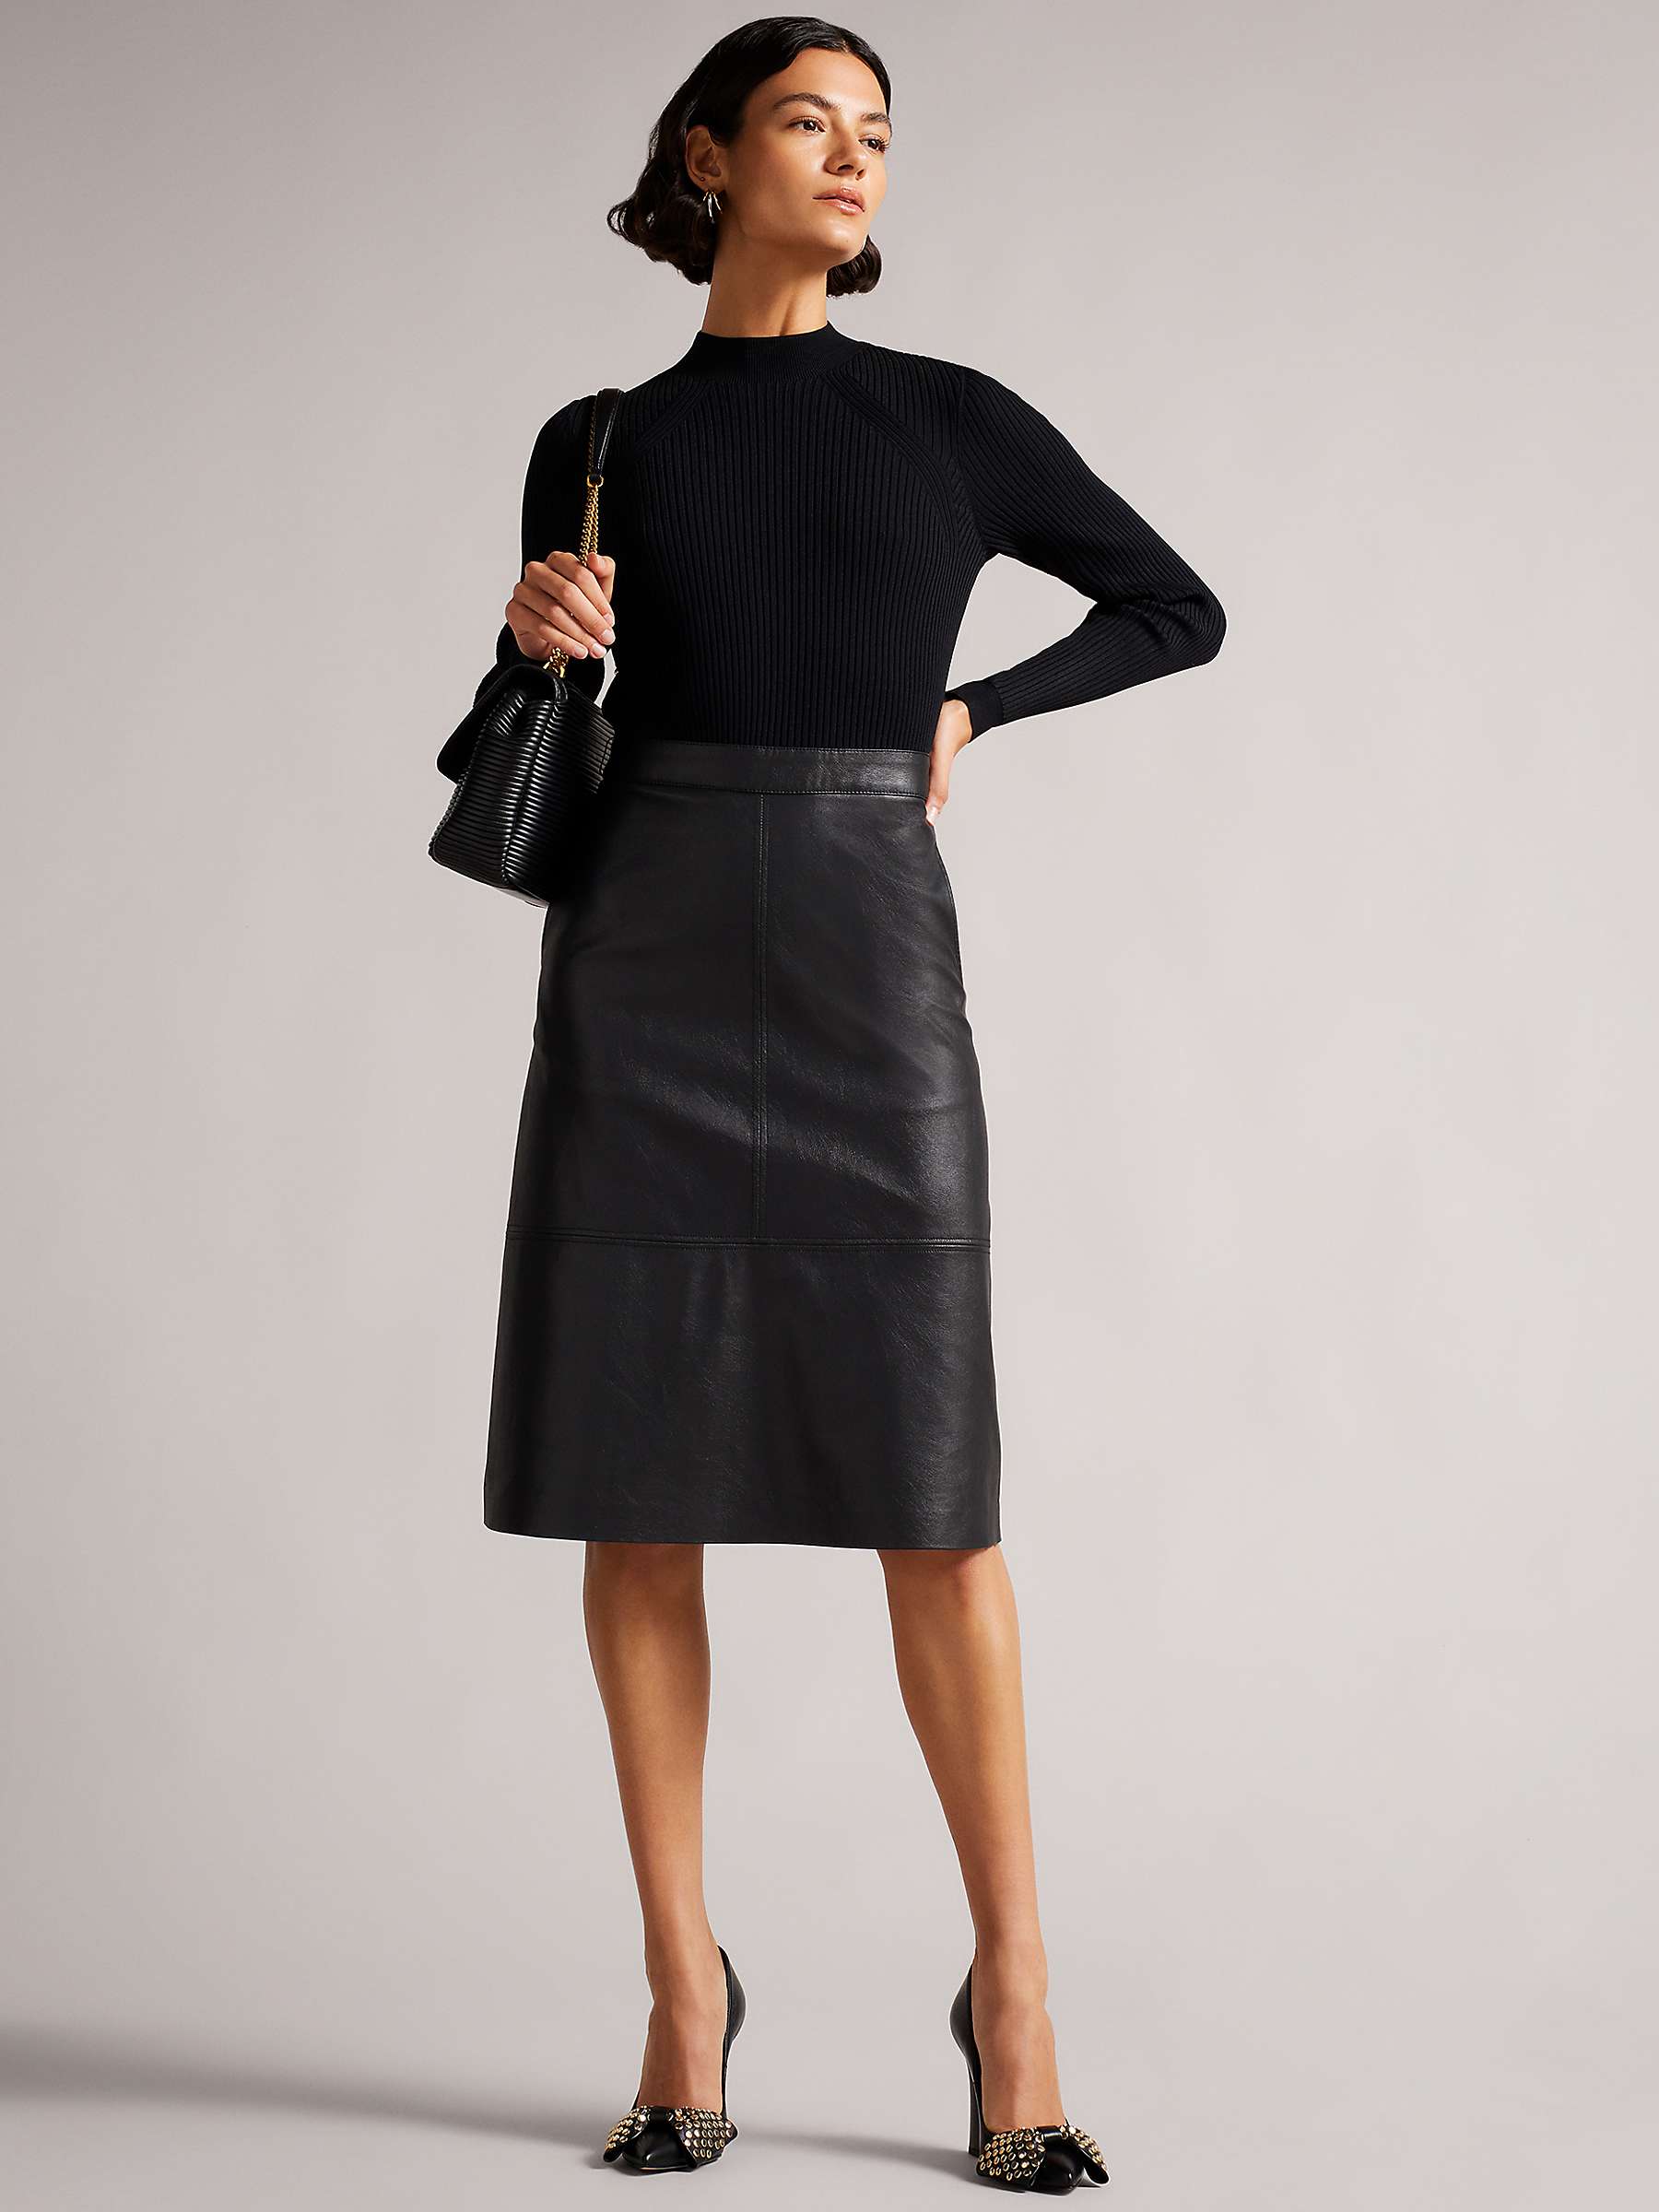 Buy Ted Baker Alltaa Knitted Bodice Dress with Faux Leather Skirt Online at johnlewis.com